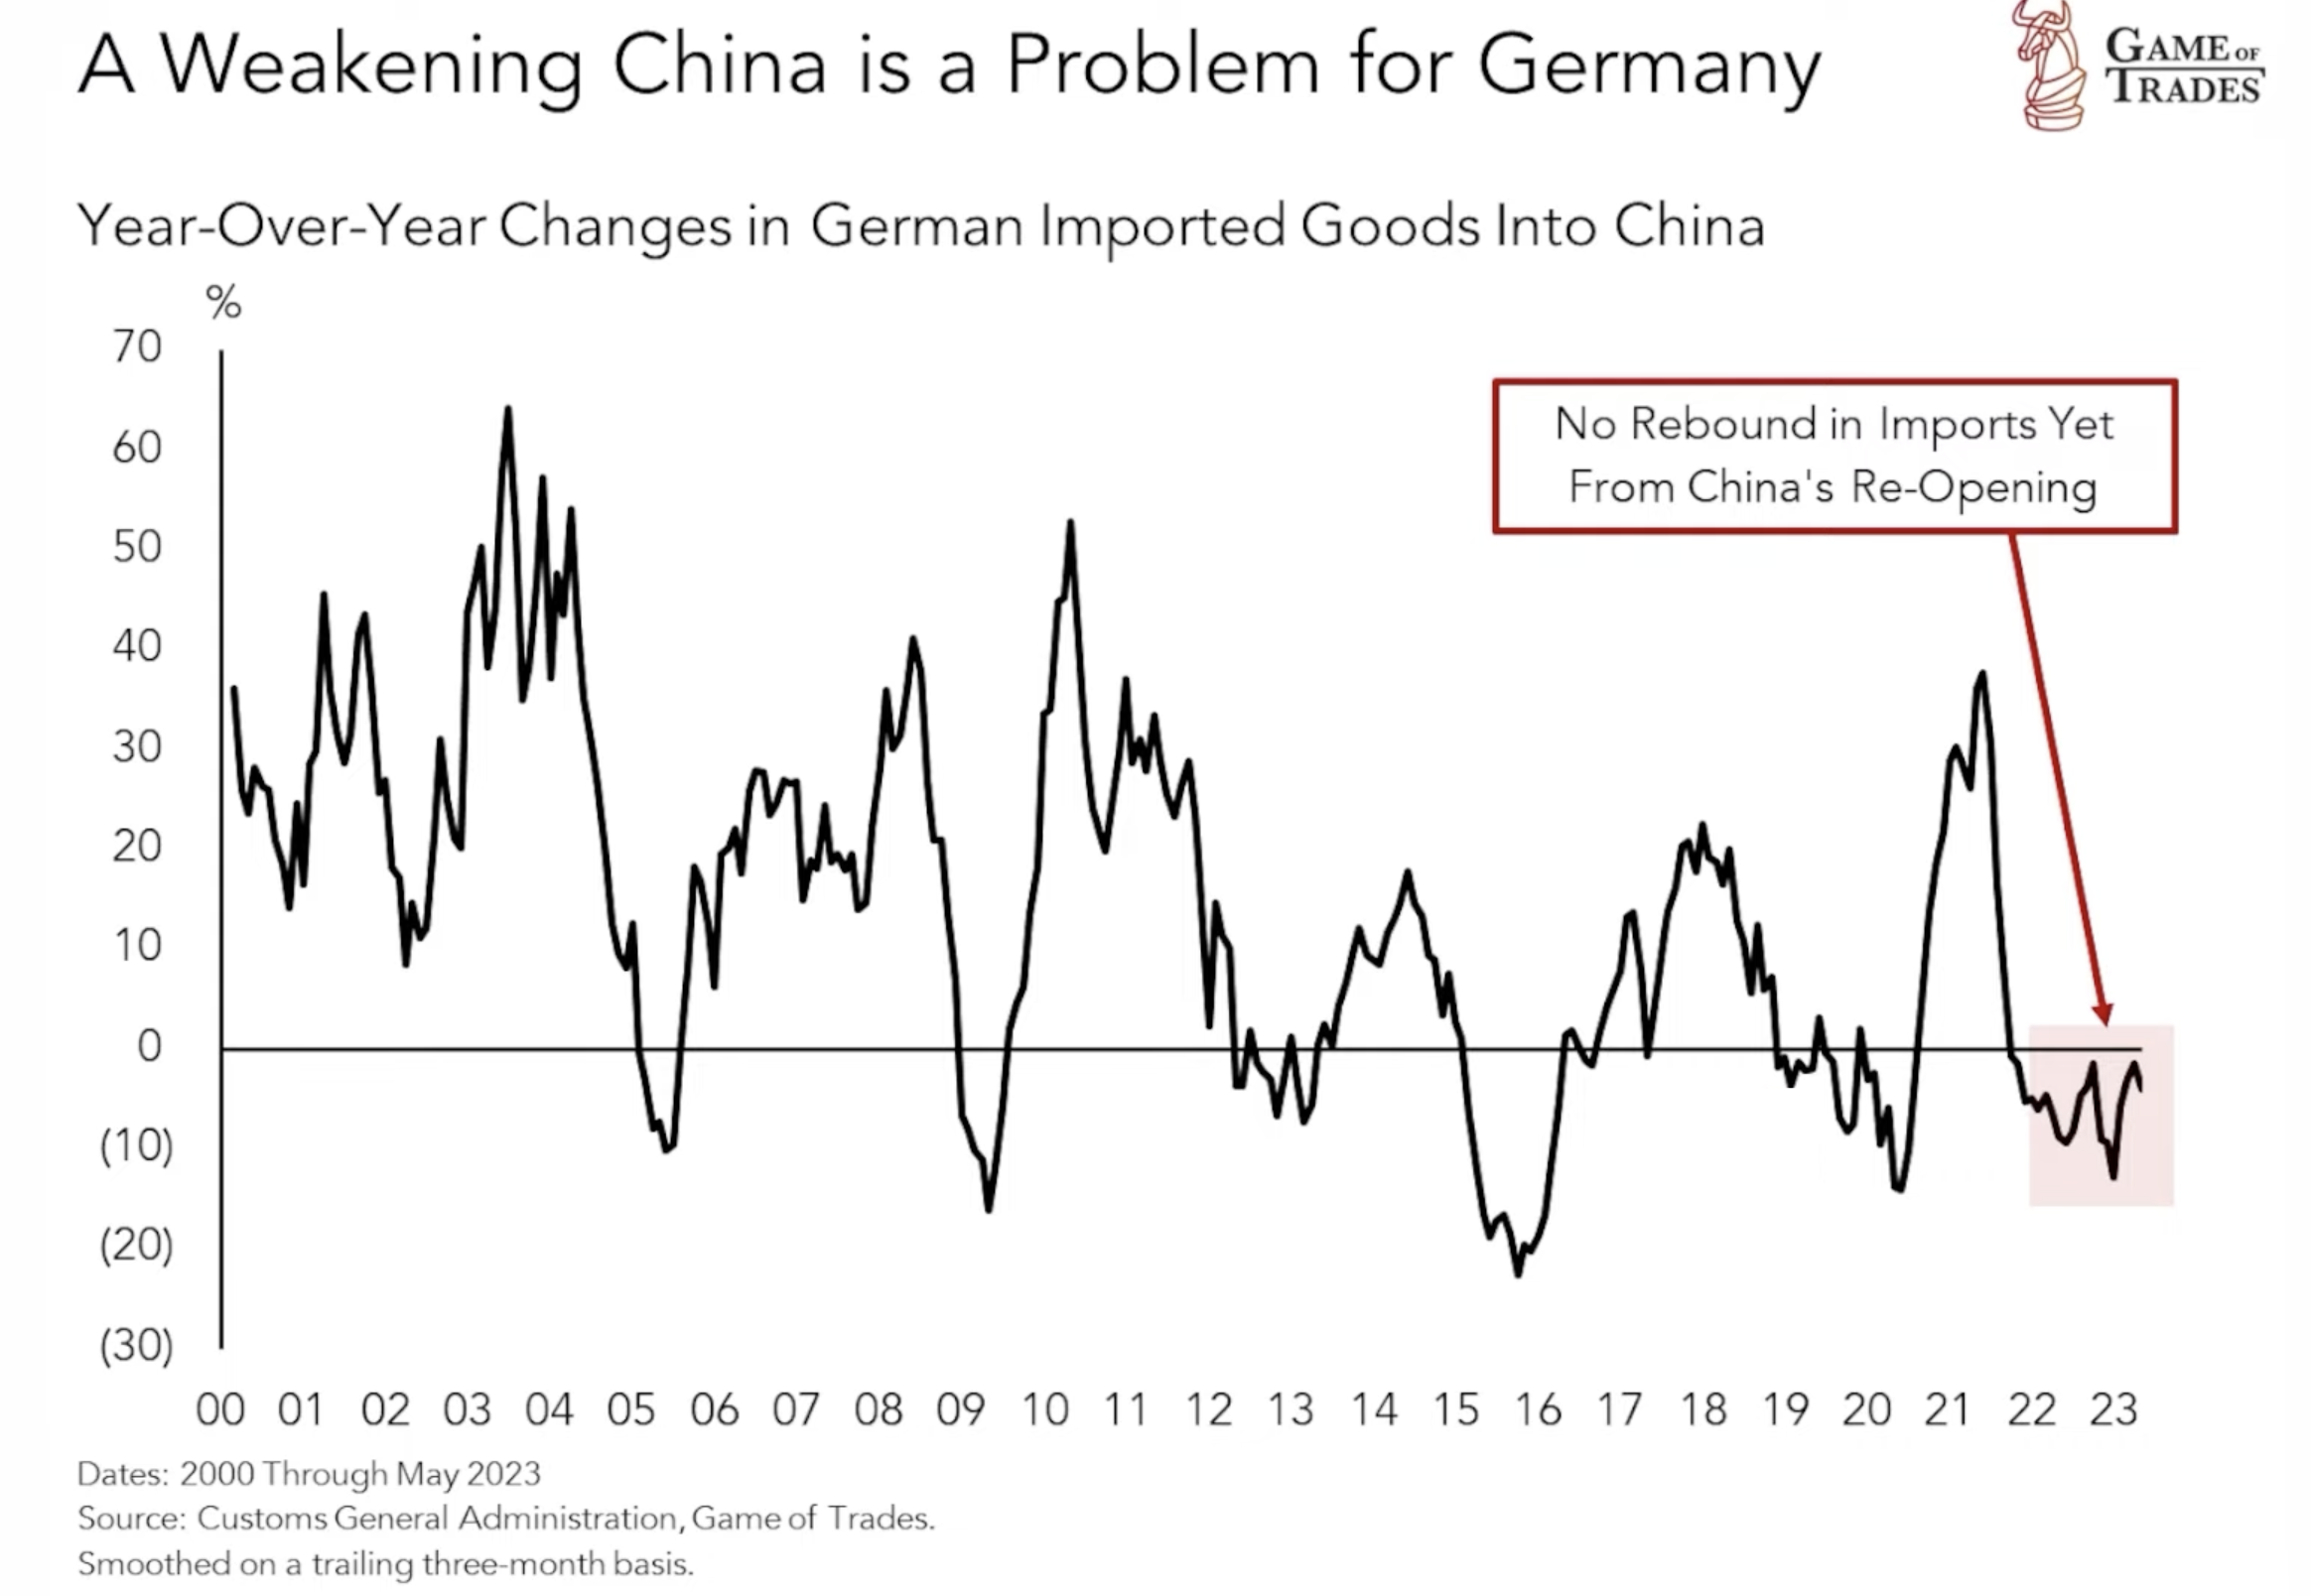 German Imported Goods Into China